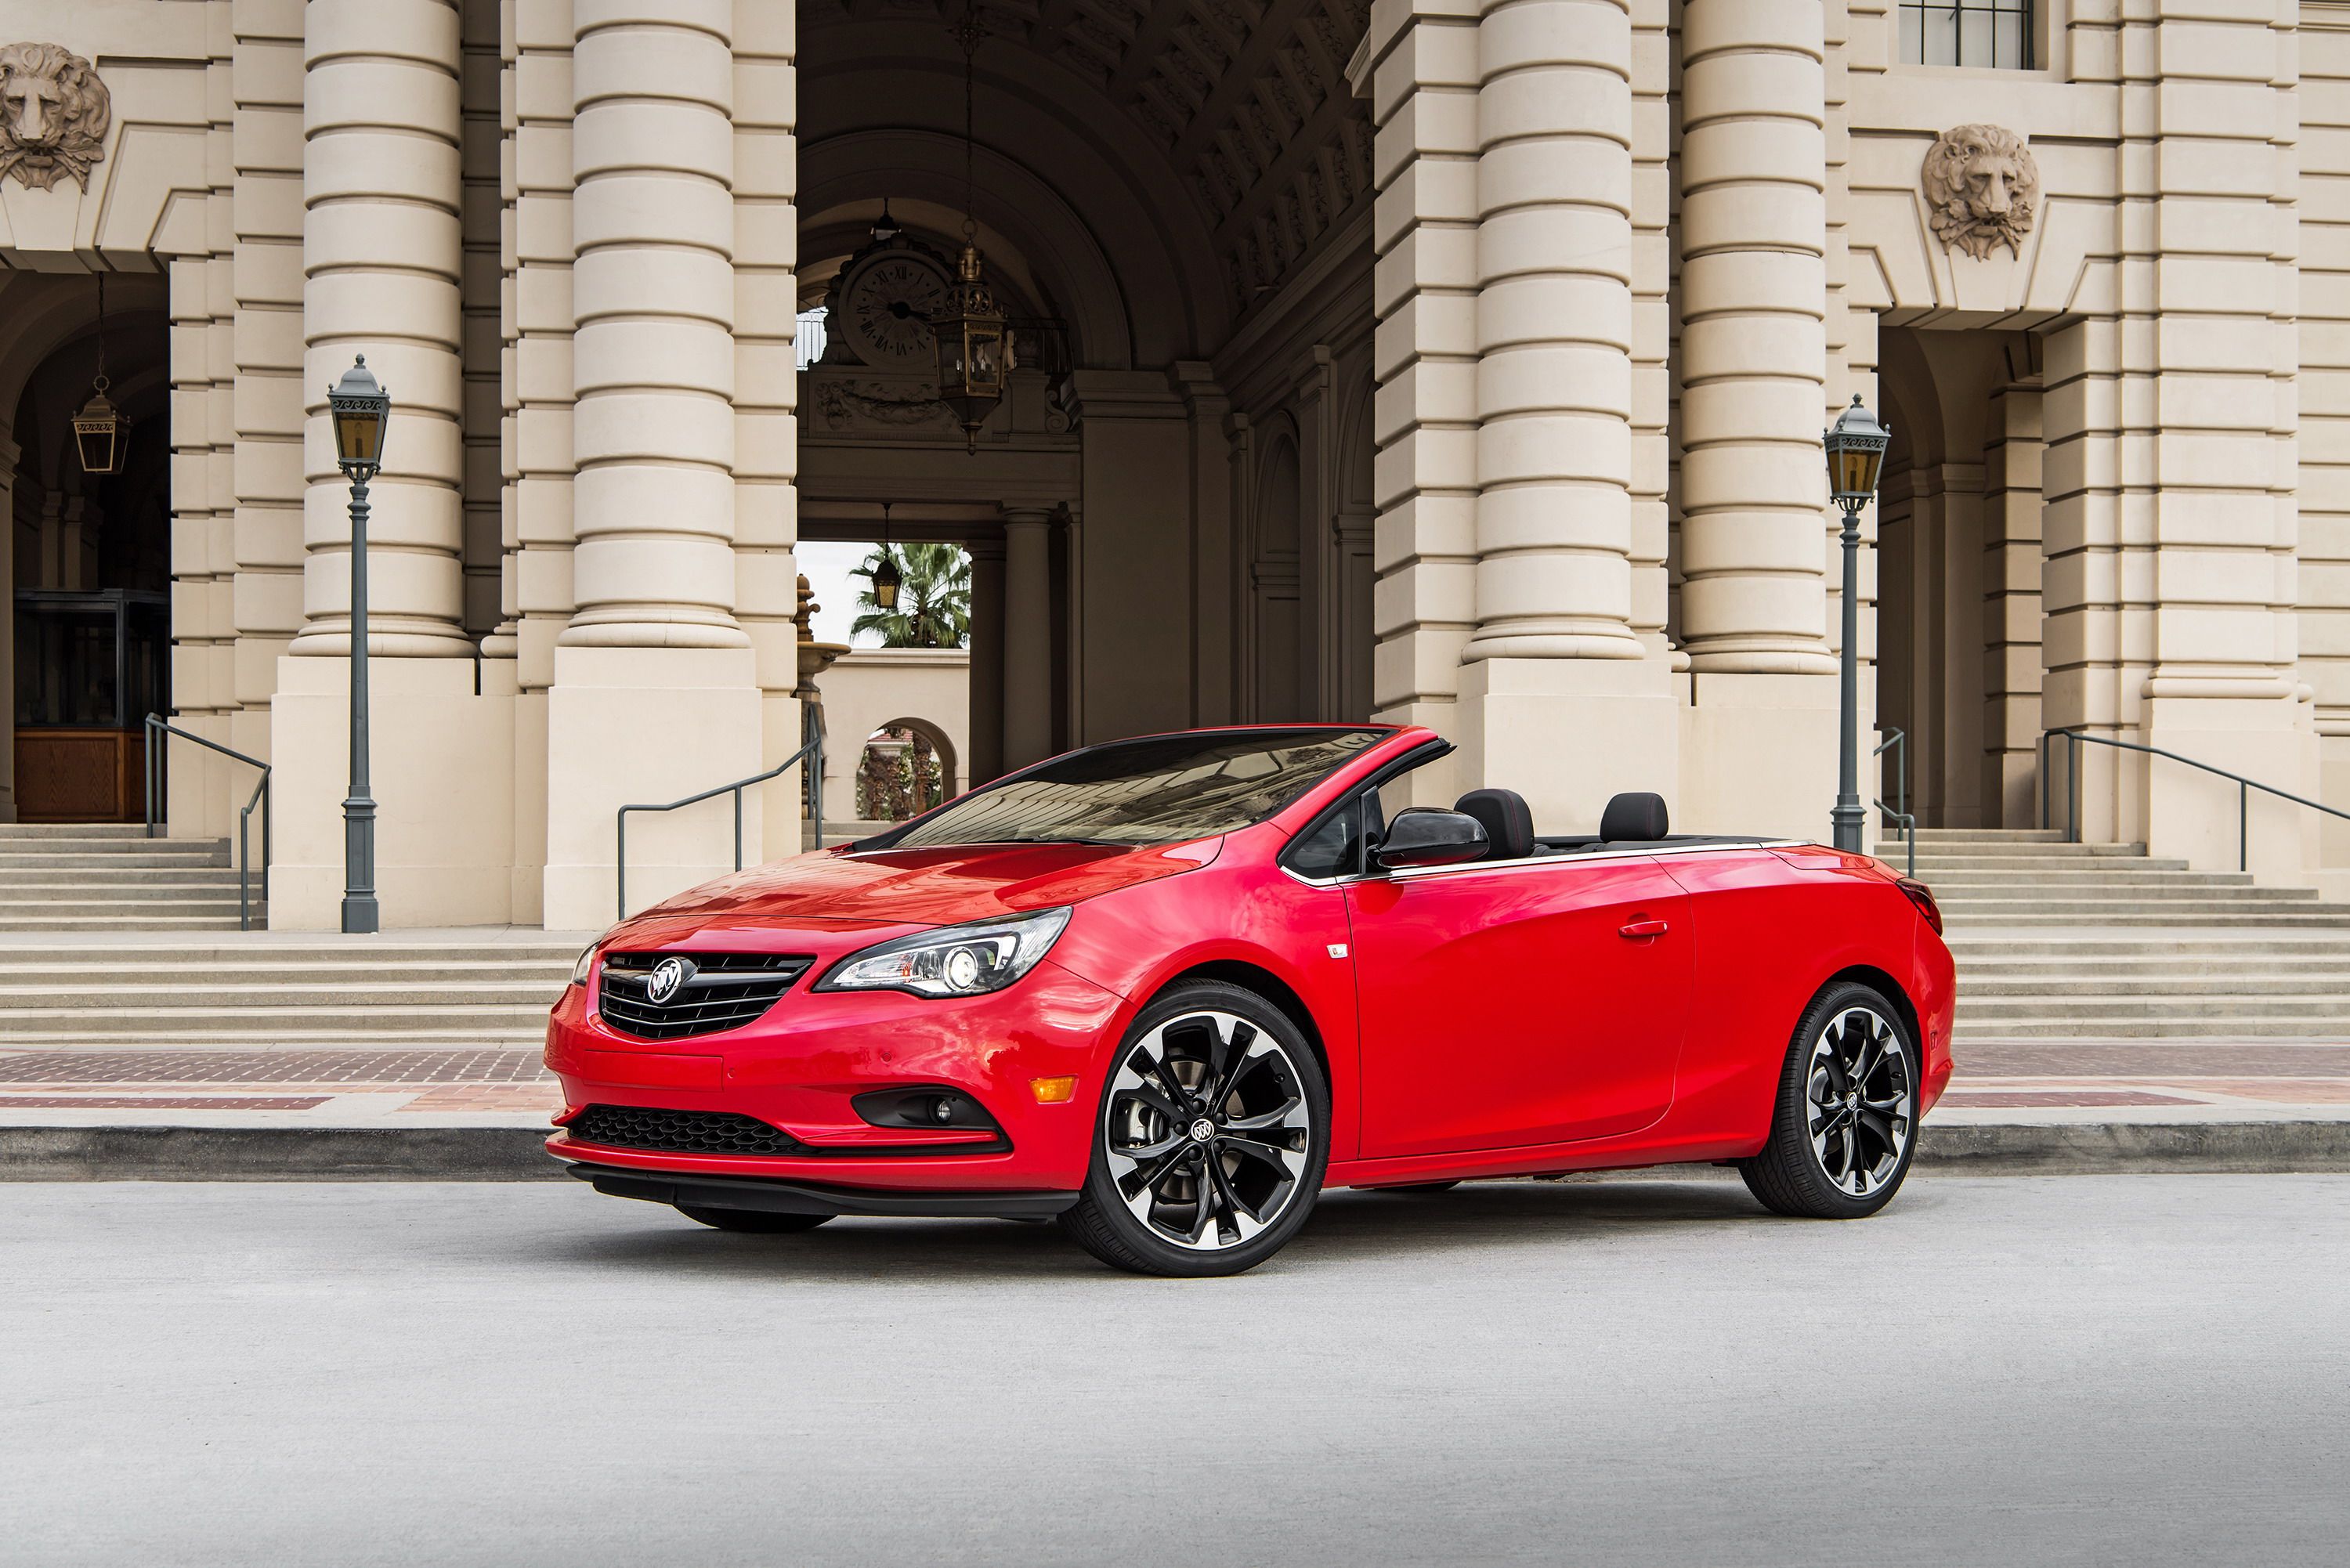 2017 Buick Cascada Sport Touring with Dark Effects Package